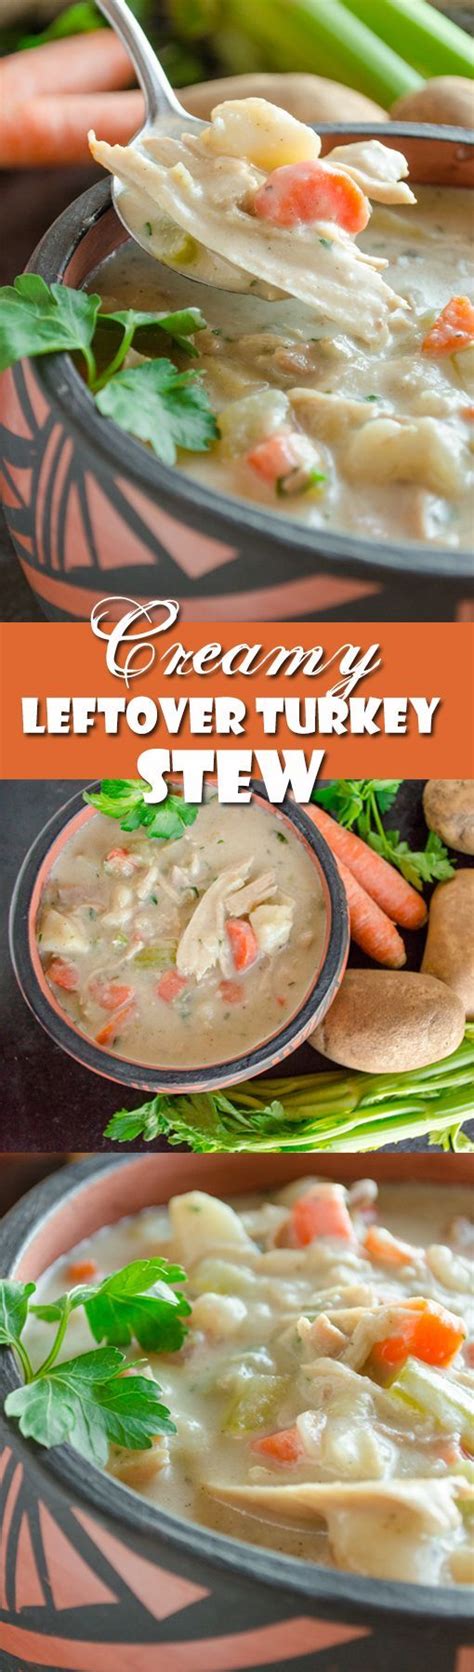 The Most Delicious Leftover Turkey Stew Ever Seriously Recipe